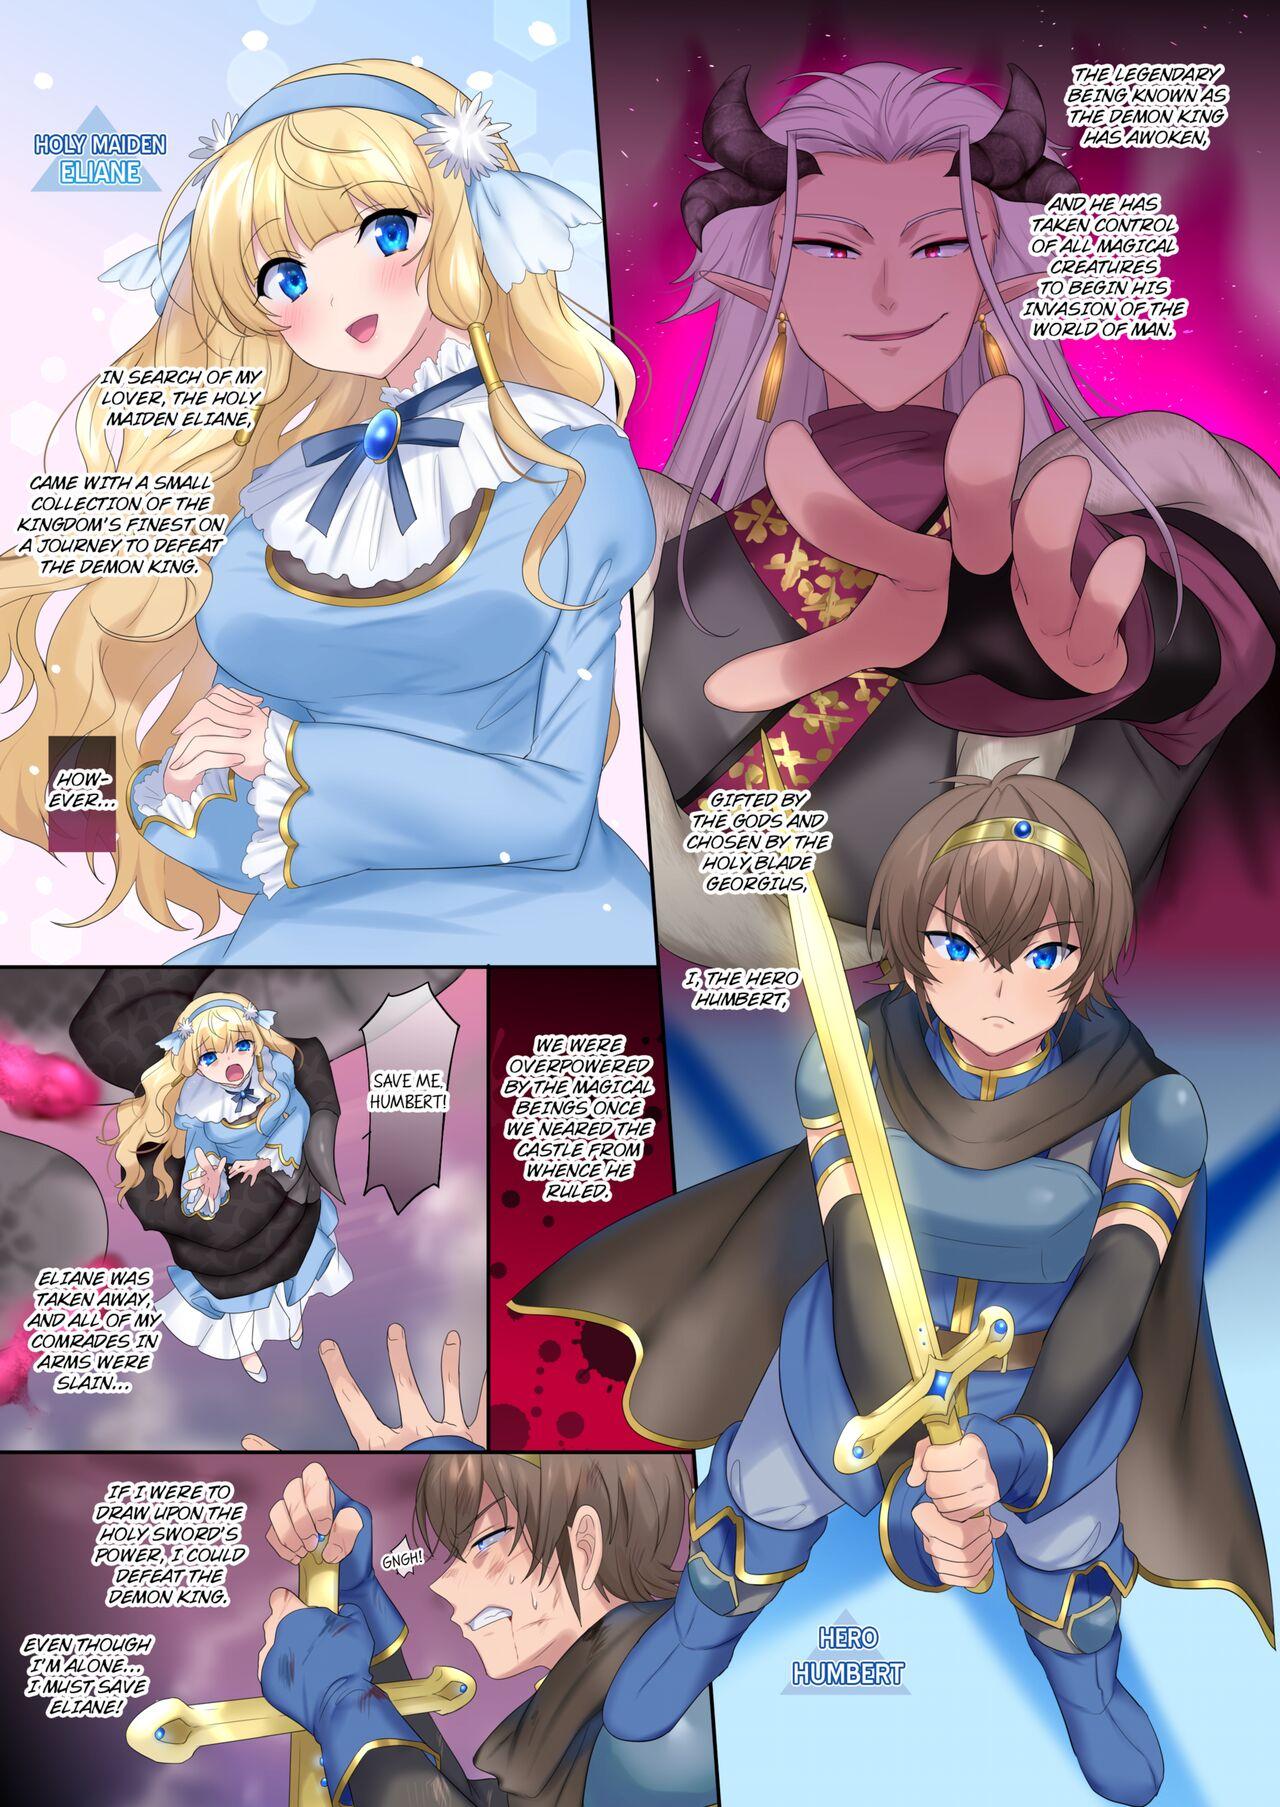 Couples A Hero's Fall from Grace Dragon Princess Cumming - Page 3